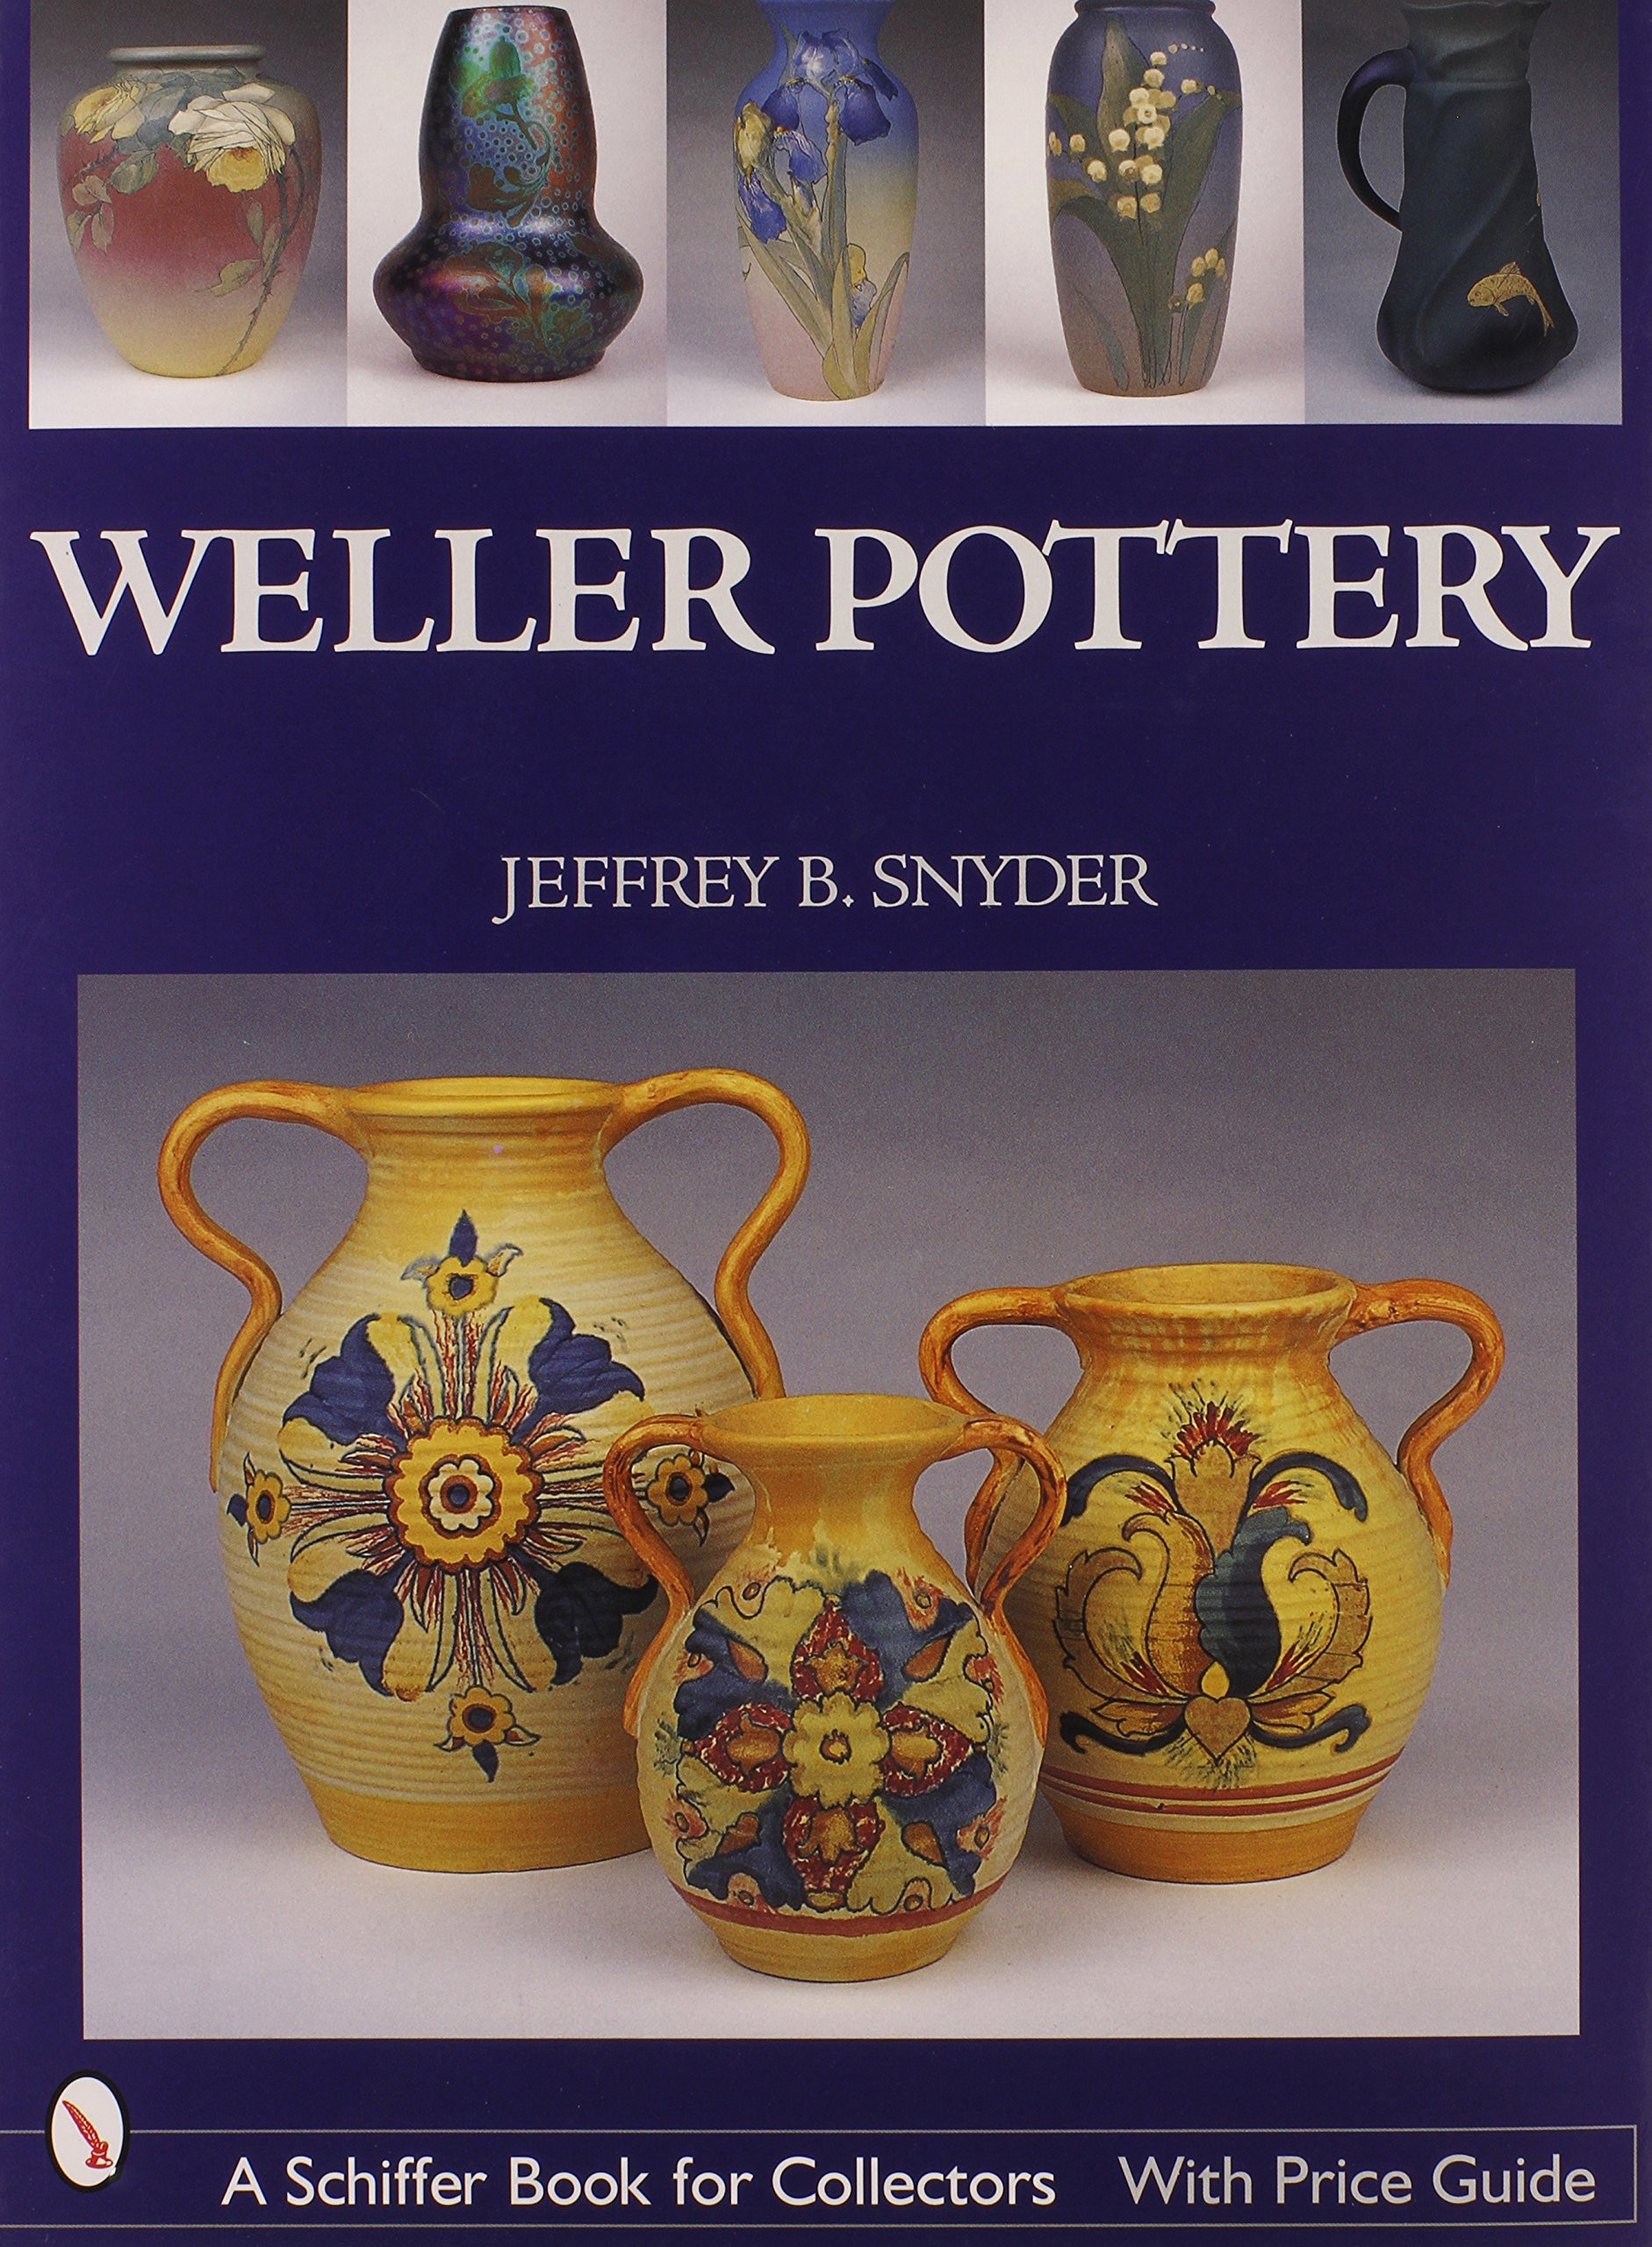 13 Amazing Louwelsa Weller Vase 2024 free download louwelsa weller vase of weller pottery schiffer book for collectors jeffrey b snyder throughout weller pottery schiffer book for collectors jeffrey b snyder 9780764321863 amazon com books